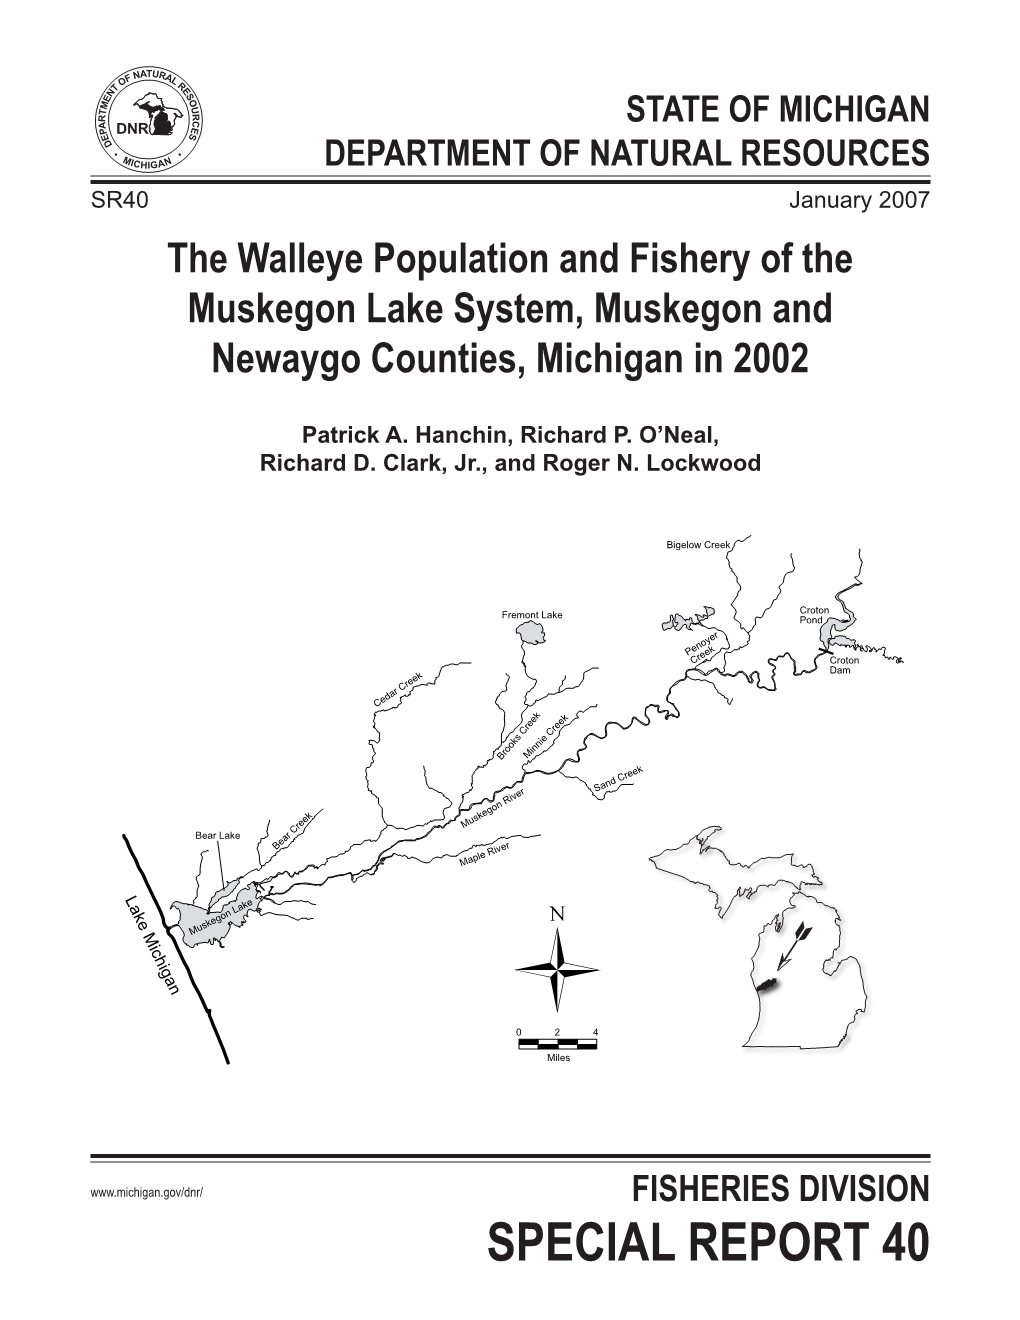 Walleye Population and Fishery of the Muskegon Lake System, Muskegon and Newaygo Counties, Michigan in 2002